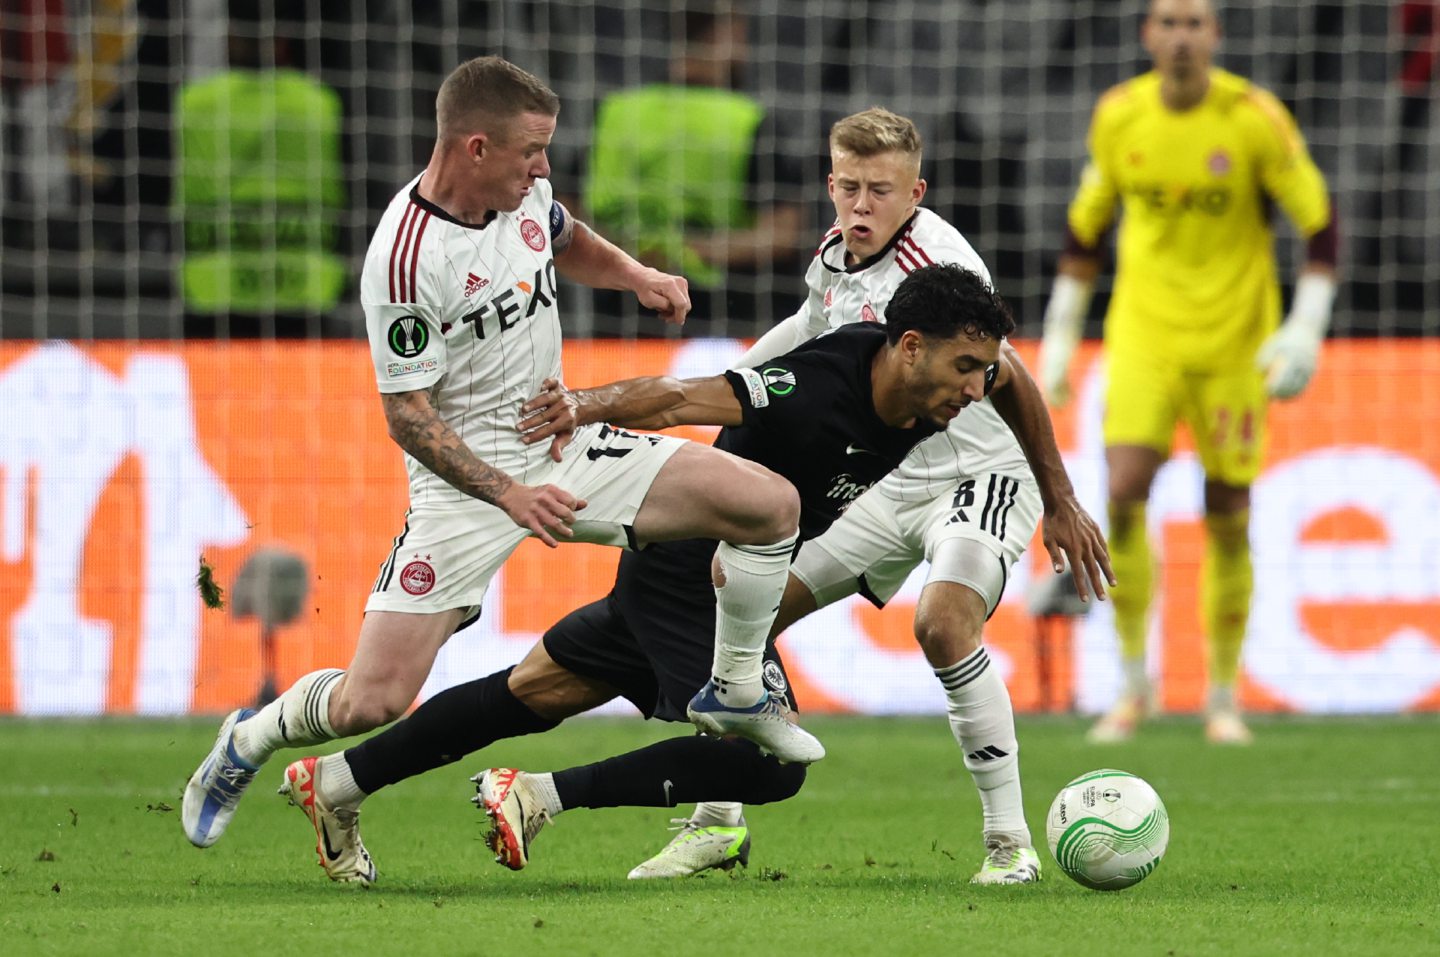 Aberdeen's Jonny Hayes and Connor Barron fighting for the ball against Eintractht Frankfurt's Fares Chaibi